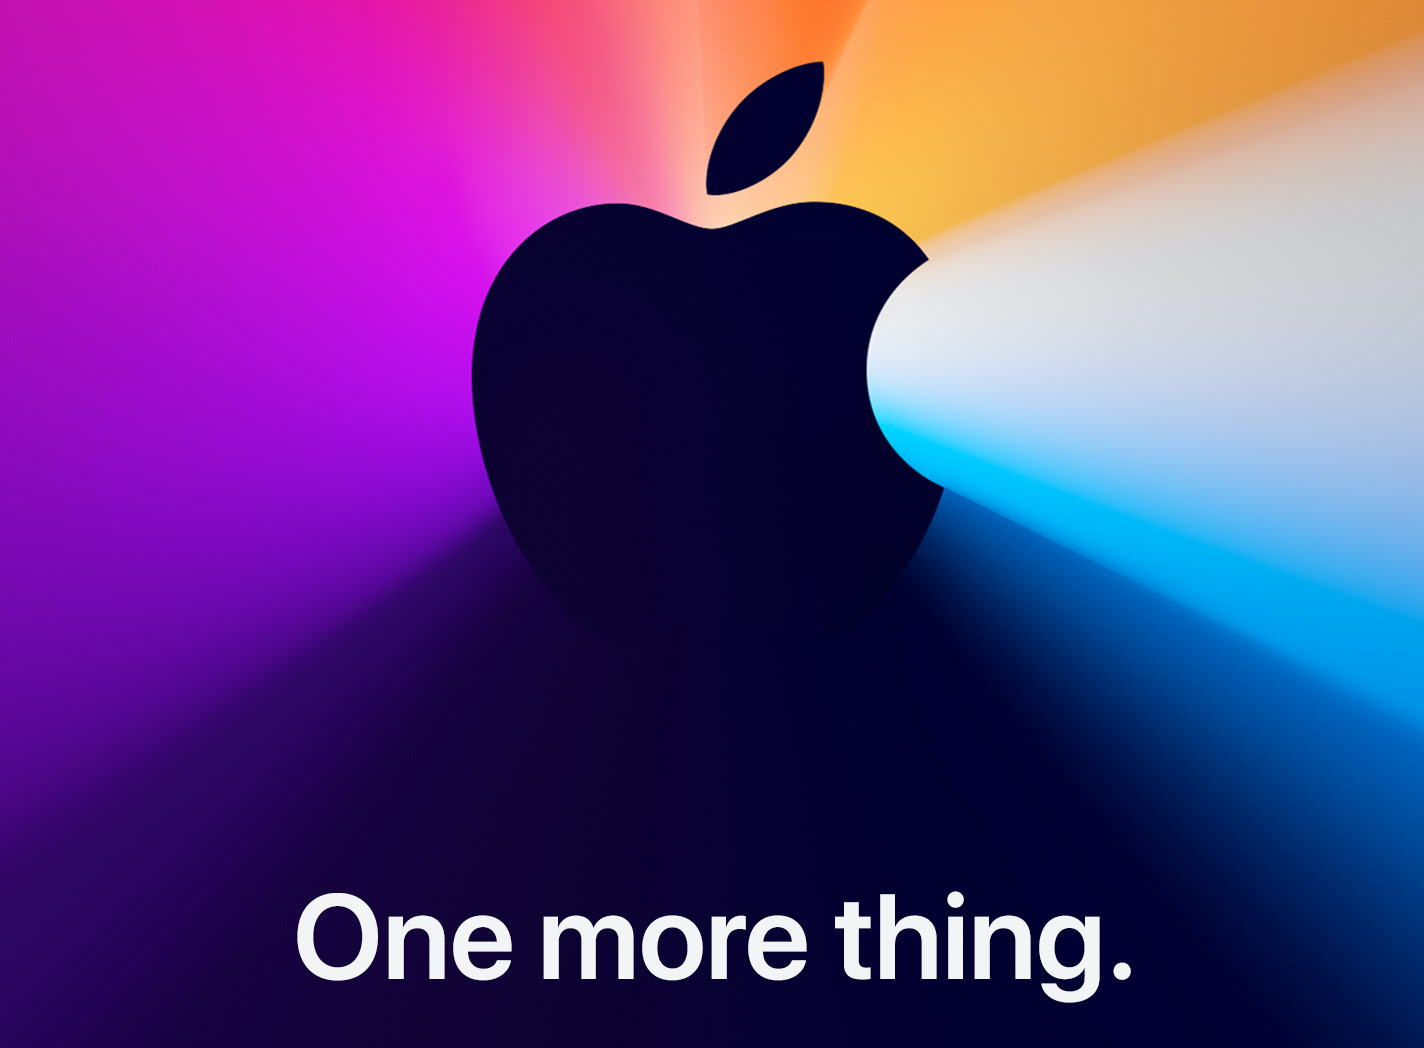 What to expect at Apple’s upcoming November 10th event